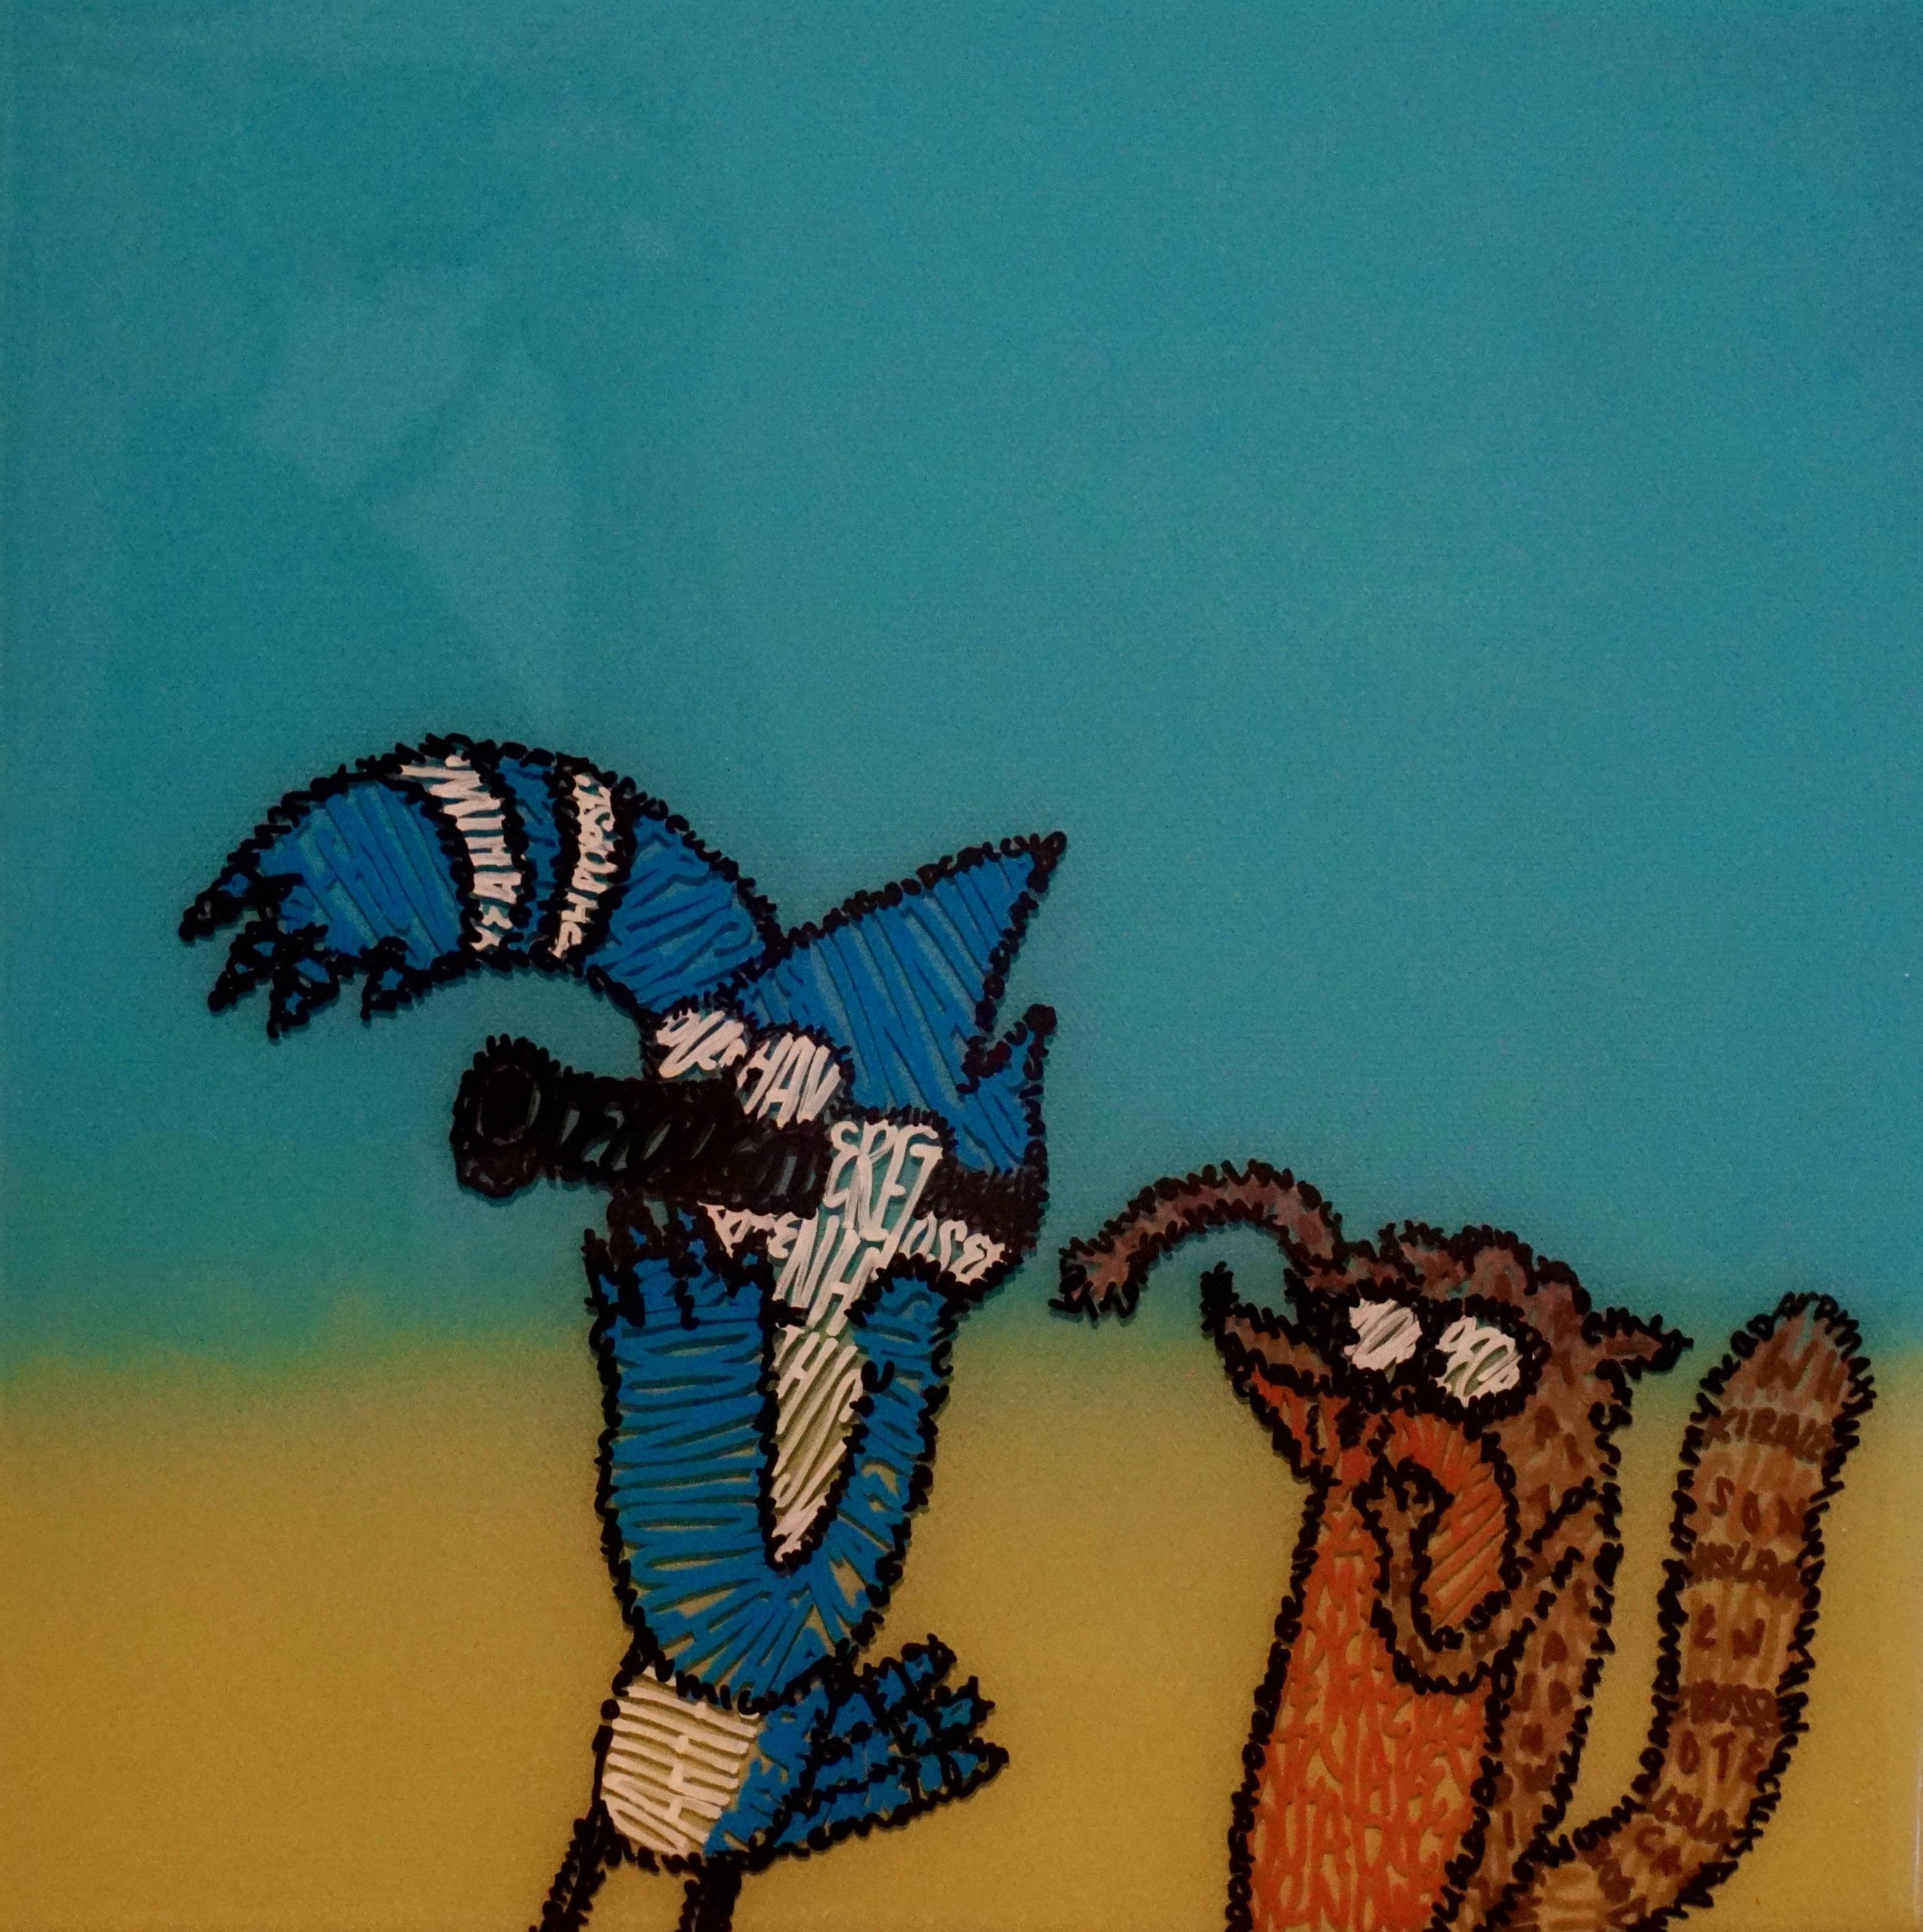 Mordecai and Rigby - Painting by Kira Lee